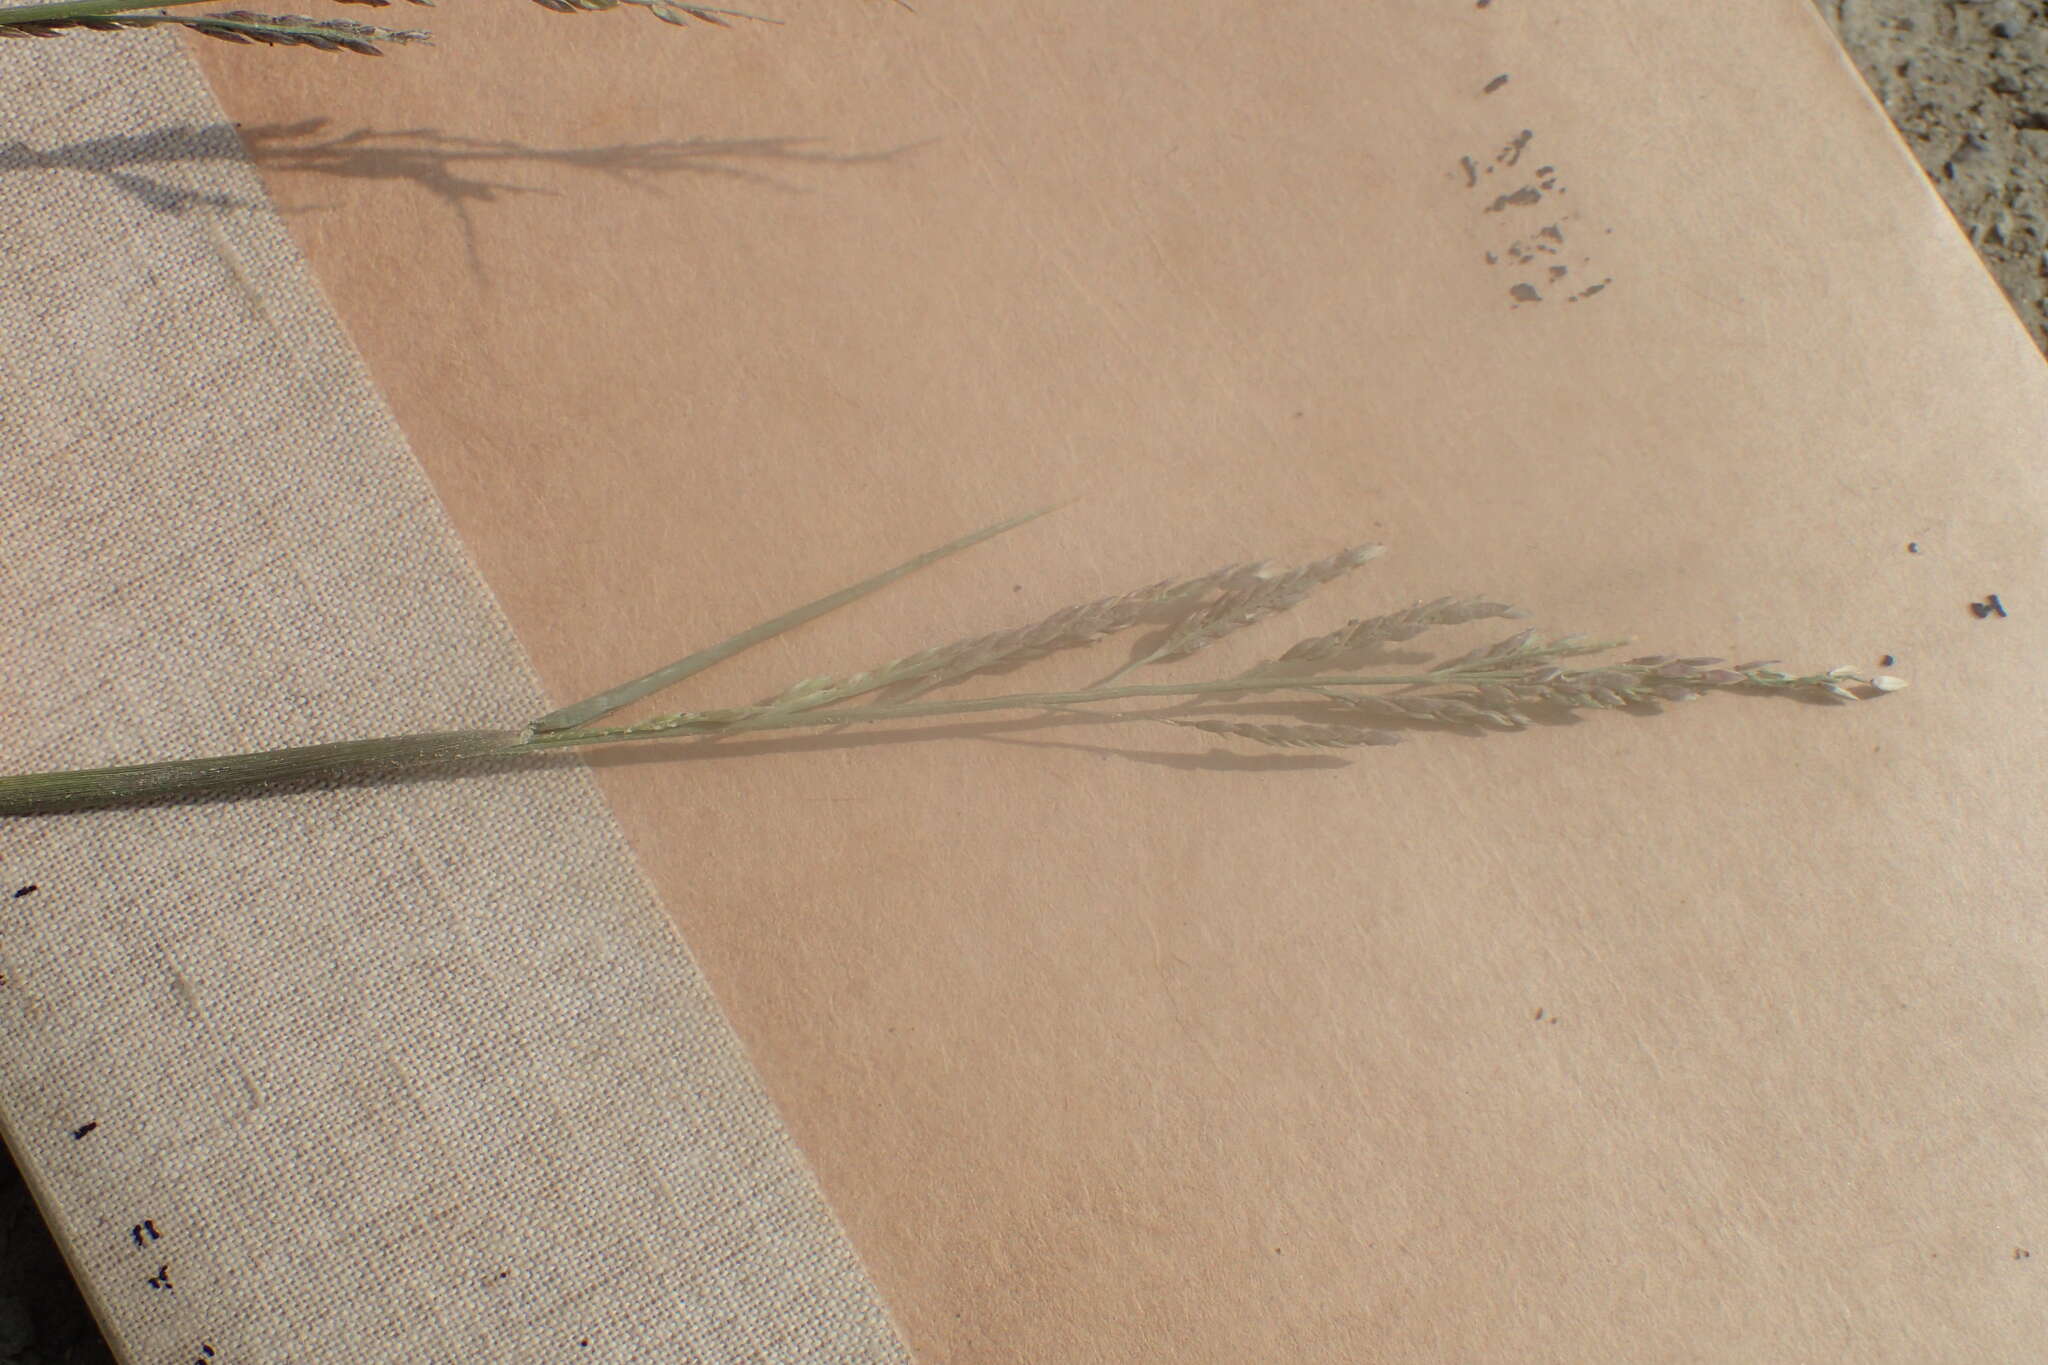 Image of Grass